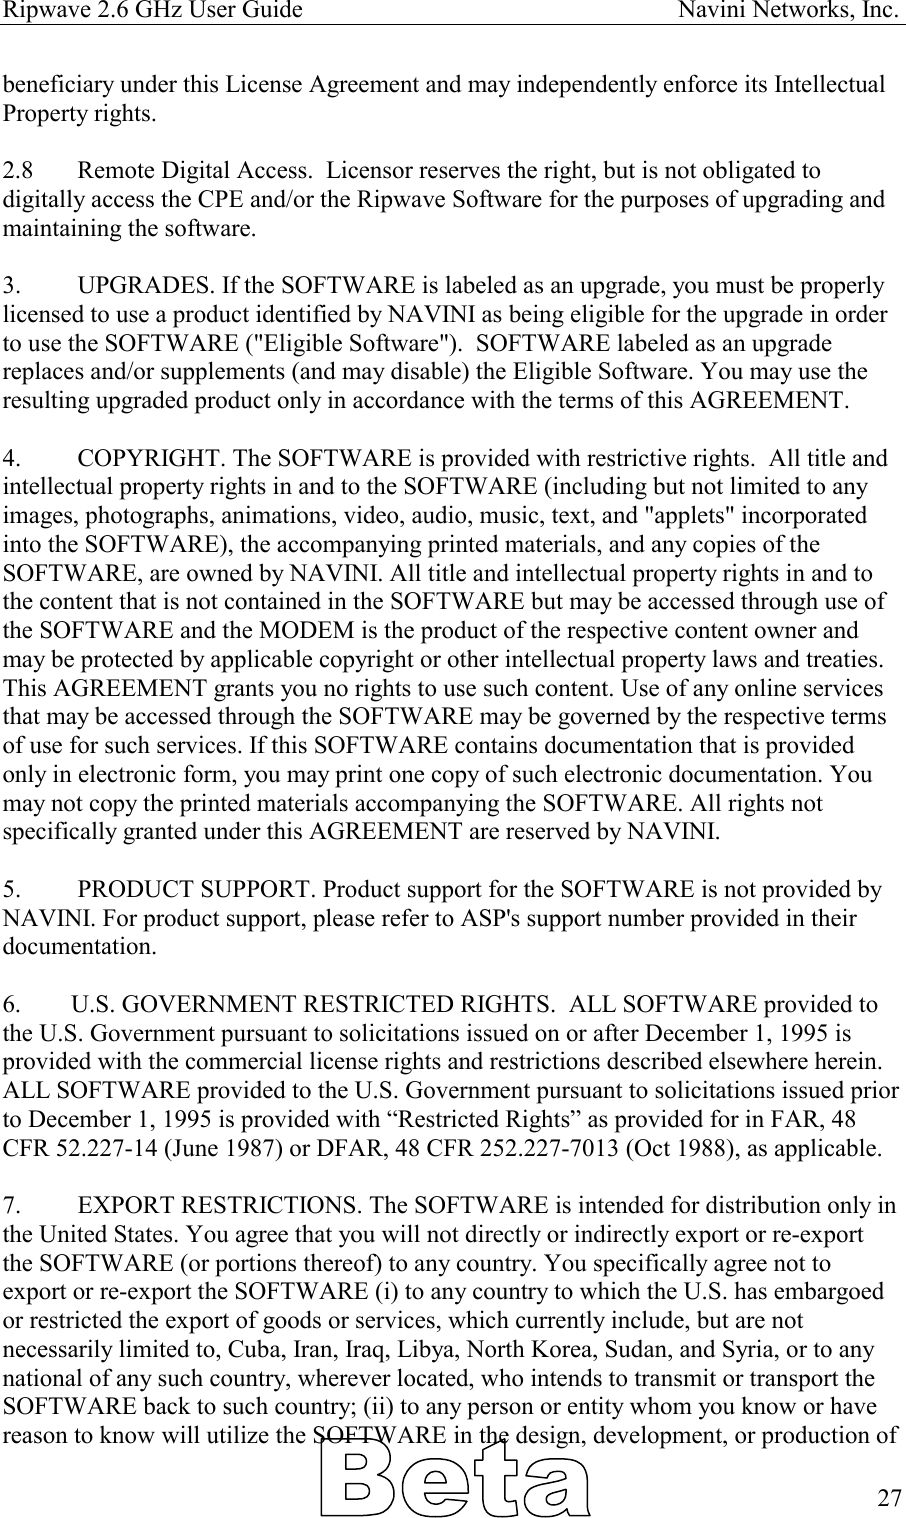 Ripwave 2.6 GHz User Guide                                                            Navini Networks, Inc. beneficiary under this License Agreement and may independently enforce its Intellectual Property rights.  2.8  Remote Digital Access.  Licensor reserves the right, but is not obligated to digitally access the CPE and/or the Ripwave Software for the purposes of upgrading and maintaining the software.    3.  UPGRADES. If the SOFTWARE is labeled as an upgrade, you must be properly licensed to use a product identified by NAVINI as being eligible for the upgrade in order to use the SOFTWARE (&quot;Eligible Software&quot;).  SOFTWARE labeled as an upgrade replaces and/or supplements (and may disable) the Eligible Software. You may use the resulting upgraded product only in accordance with the terms of this AGREEMENT.   4.  COPYRIGHT. The SOFTWARE is provided with restrictive rights.  All title and intellectual property rights in and to the SOFTWARE (including but not limited to any images, photographs, animations, video, audio, music, text, and &quot;applets&quot; incorporated into the SOFTWARE), the accompanying printed materials, and any copies of the SOFTWARE, are owned by NAVINI. All title and intellectual property rights in and to the content that is not contained in the SOFTWARE but may be accessed through use of the SOFTWARE and the MODEM is the product of the respective content owner and may be protected by applicable copyright or other intellectual property laws and treaties. This AGREEMENT grants you no rights to use such content. Use of any online services that may be accessed through the SOFTWARE may be governed by the respective terms of use for such services. If this SOFTWARE contains documentation that is provided only in electronic form, you may print one copy of such electronic documentation. You may not copy the printed materials accompanying the SOFTWARE. All rights not specifically granted under this AGREEMENT are reserved by NAVINI.  5.  PRODUCT SUPPORT. Product support for the SOFTWARE is not provided by NAVINI. For product support, please refer to ASP&apos;s support number provided in their documentation.  6.        U.S. GOVERNMENT RESTRICTED RIGHTS.  ALL SOFTWARE provided to the U.S. Government pursuant to solicitations issued on or after December 1, 1995 is provided with the commercial license rights and restrictions described elsewhere herein.  ALL SOFTWARE provided to the U.S. Government pursuant to solicitations issued prior to December 1, 1995 is provided with “Restricted Rights” as provided for in FAR, 48 CFR 52.227-14 (June 1987) or DFAR, 48 CFR 252.227-7013 (Oct 1988), as applicable.              7.  EXPORT RESTRICTIONS. The SOFTWARE is intended for distribution only in the United States. You agree that you will not directly or indirectly export or re-export the SOFTWARE (or portions thereof) to any country. You specifically agree not to export or re-export the SOFTWARE (i) to any country to which the U.S. has embargoed or restricted the export of goods or services, which currently include, but are not necessarily limited to, Cuba, Iran, Iraq, Libya, North Korea, Sudan, and Syria, or to any national of any such country, wherever located, who intends to transmit or transport the SOFTWARE back to such country; (ii) to any person or entity whom you know or have reason to know will utilize the SOFTWARE in the design, development, or production of   27